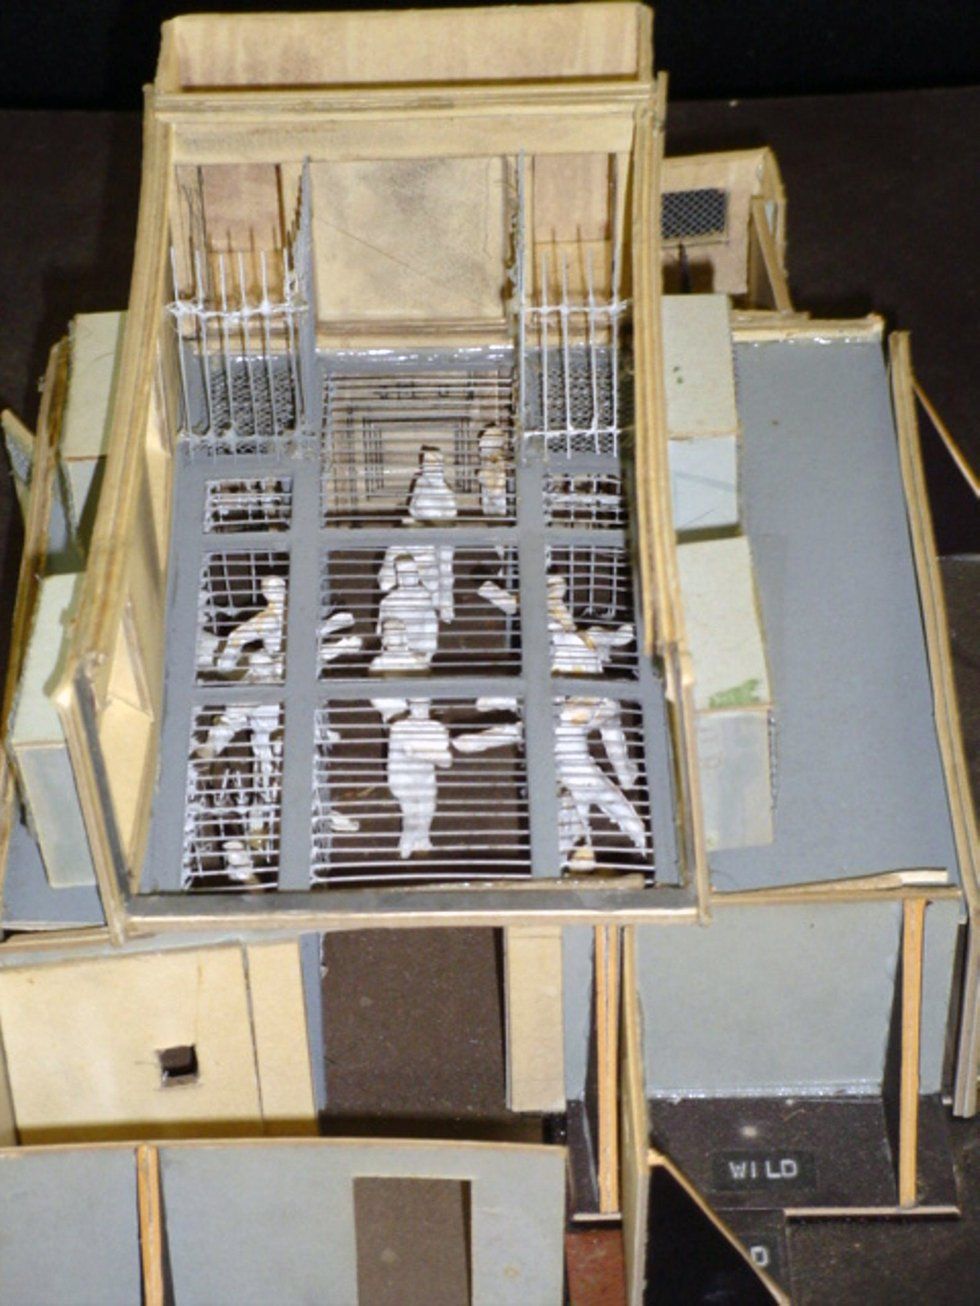 A model of the set of the prison.